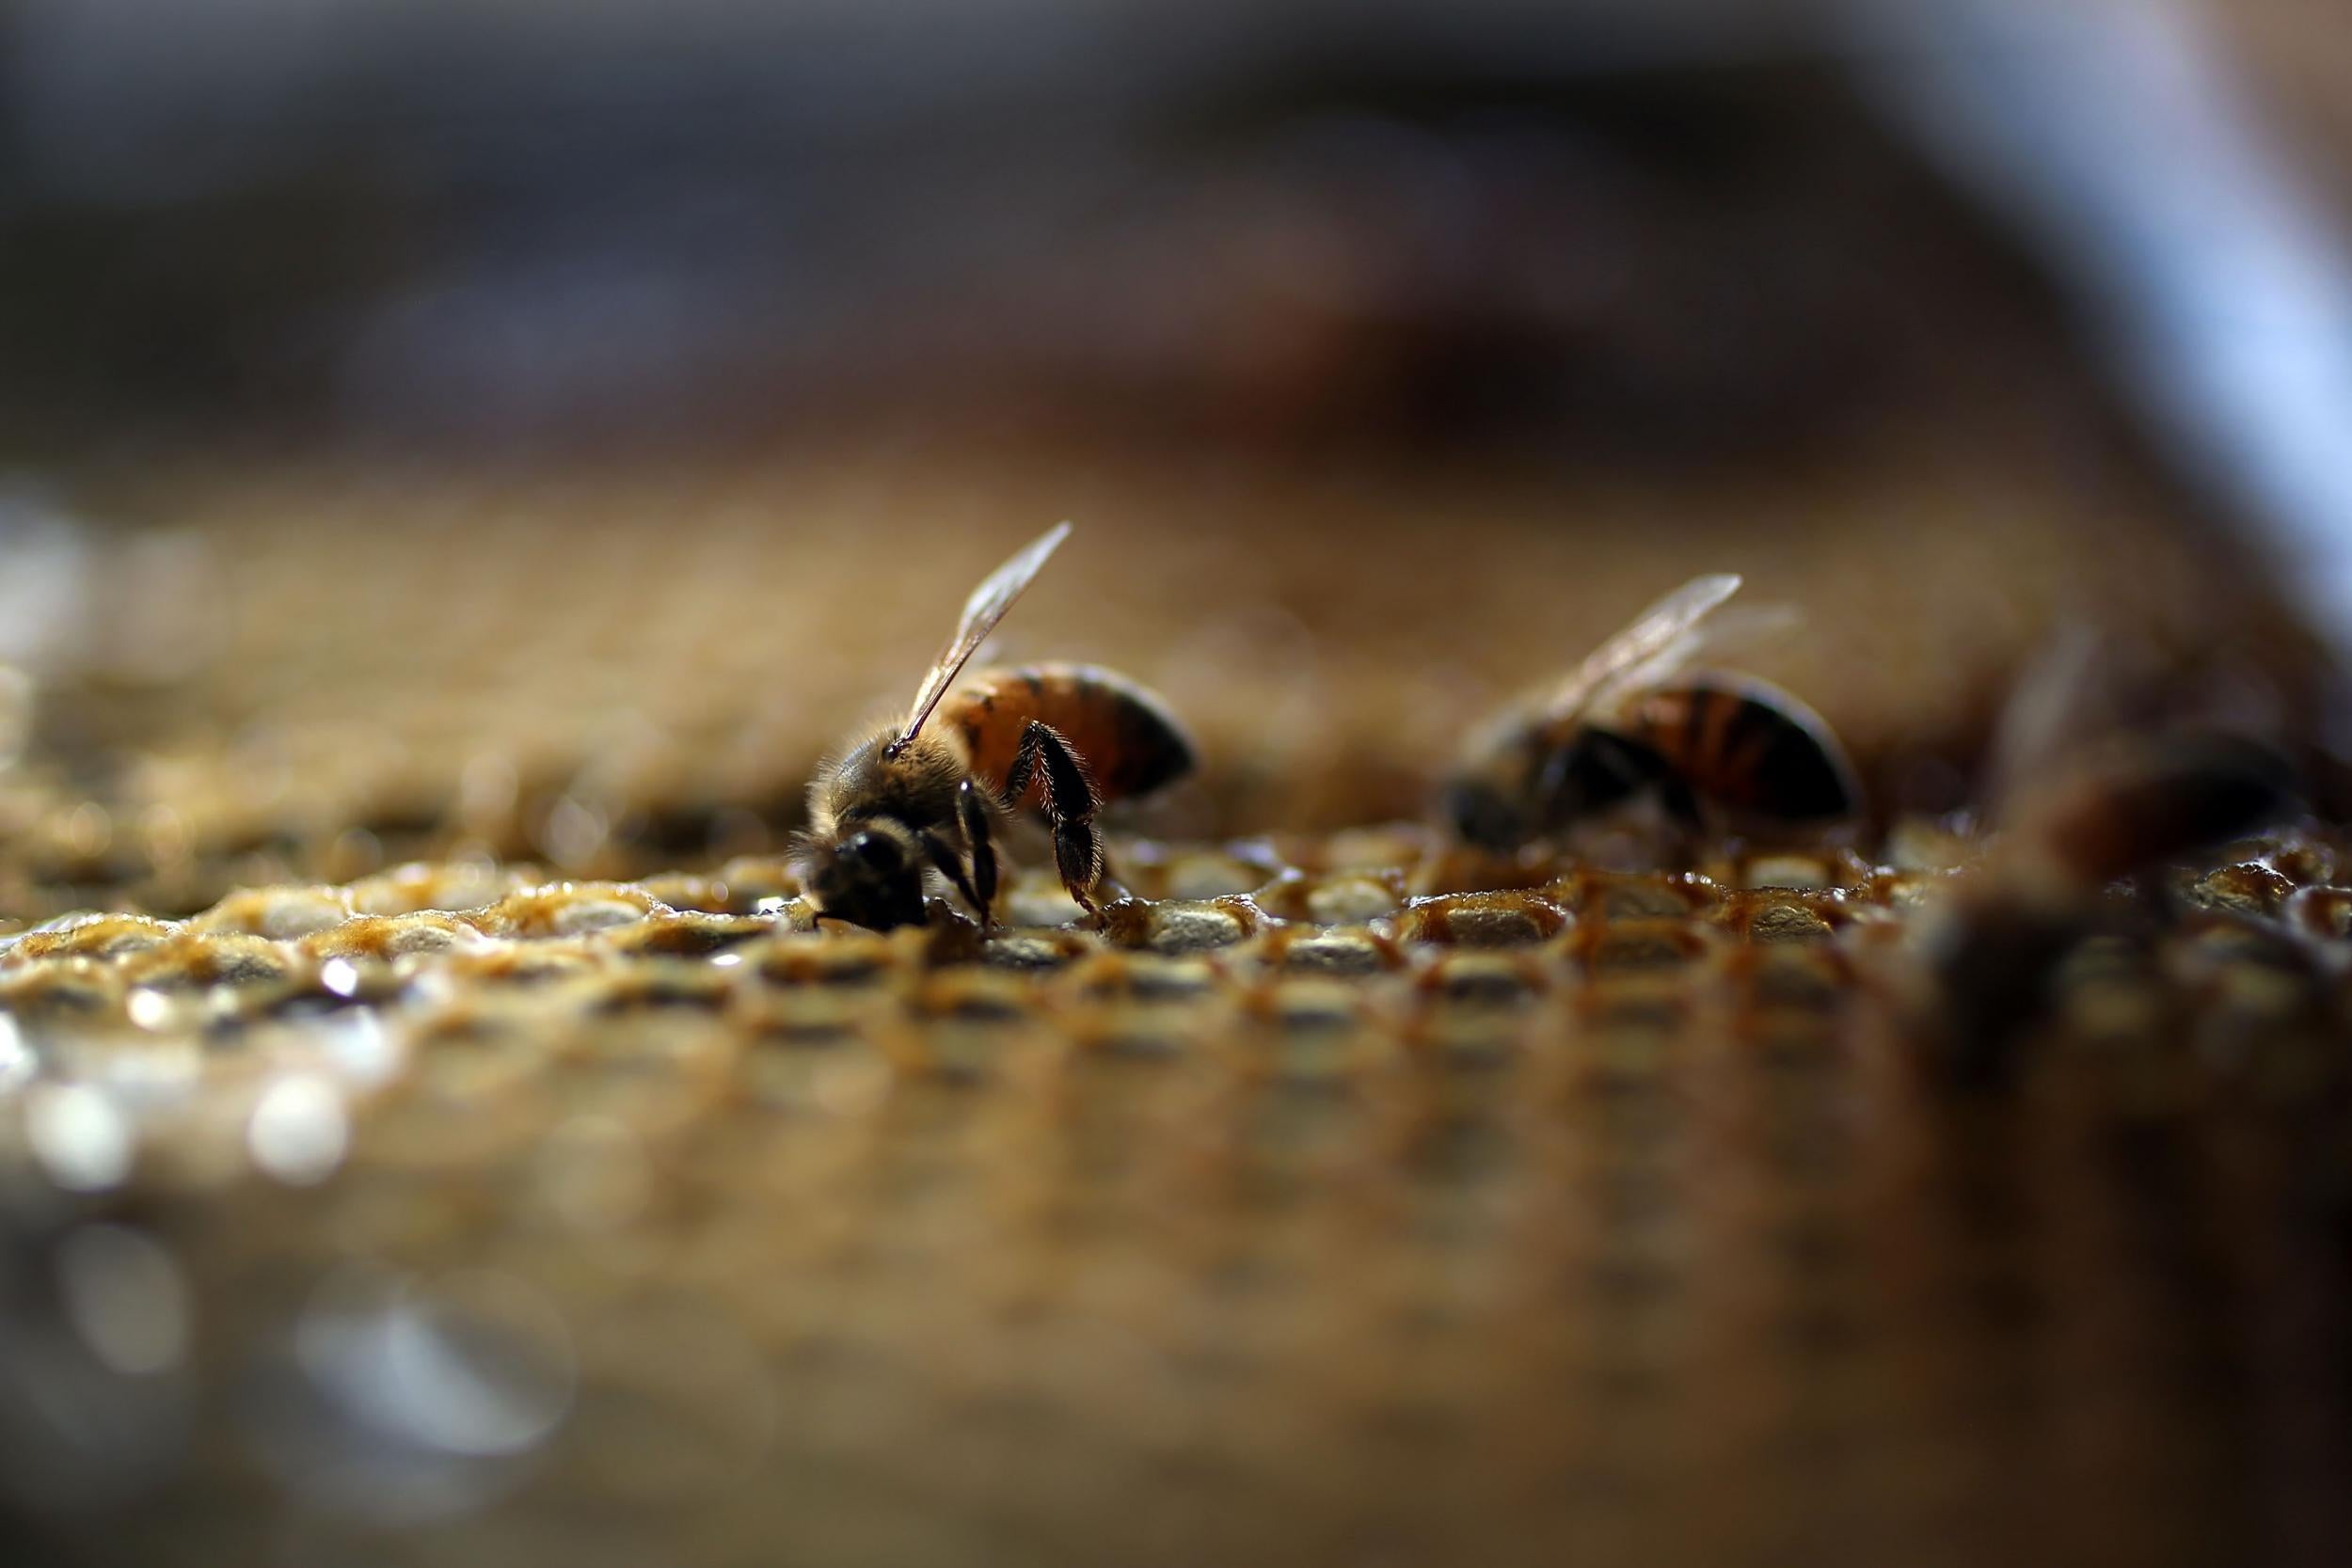 Despite their size, bees have the ability to figure complex situations